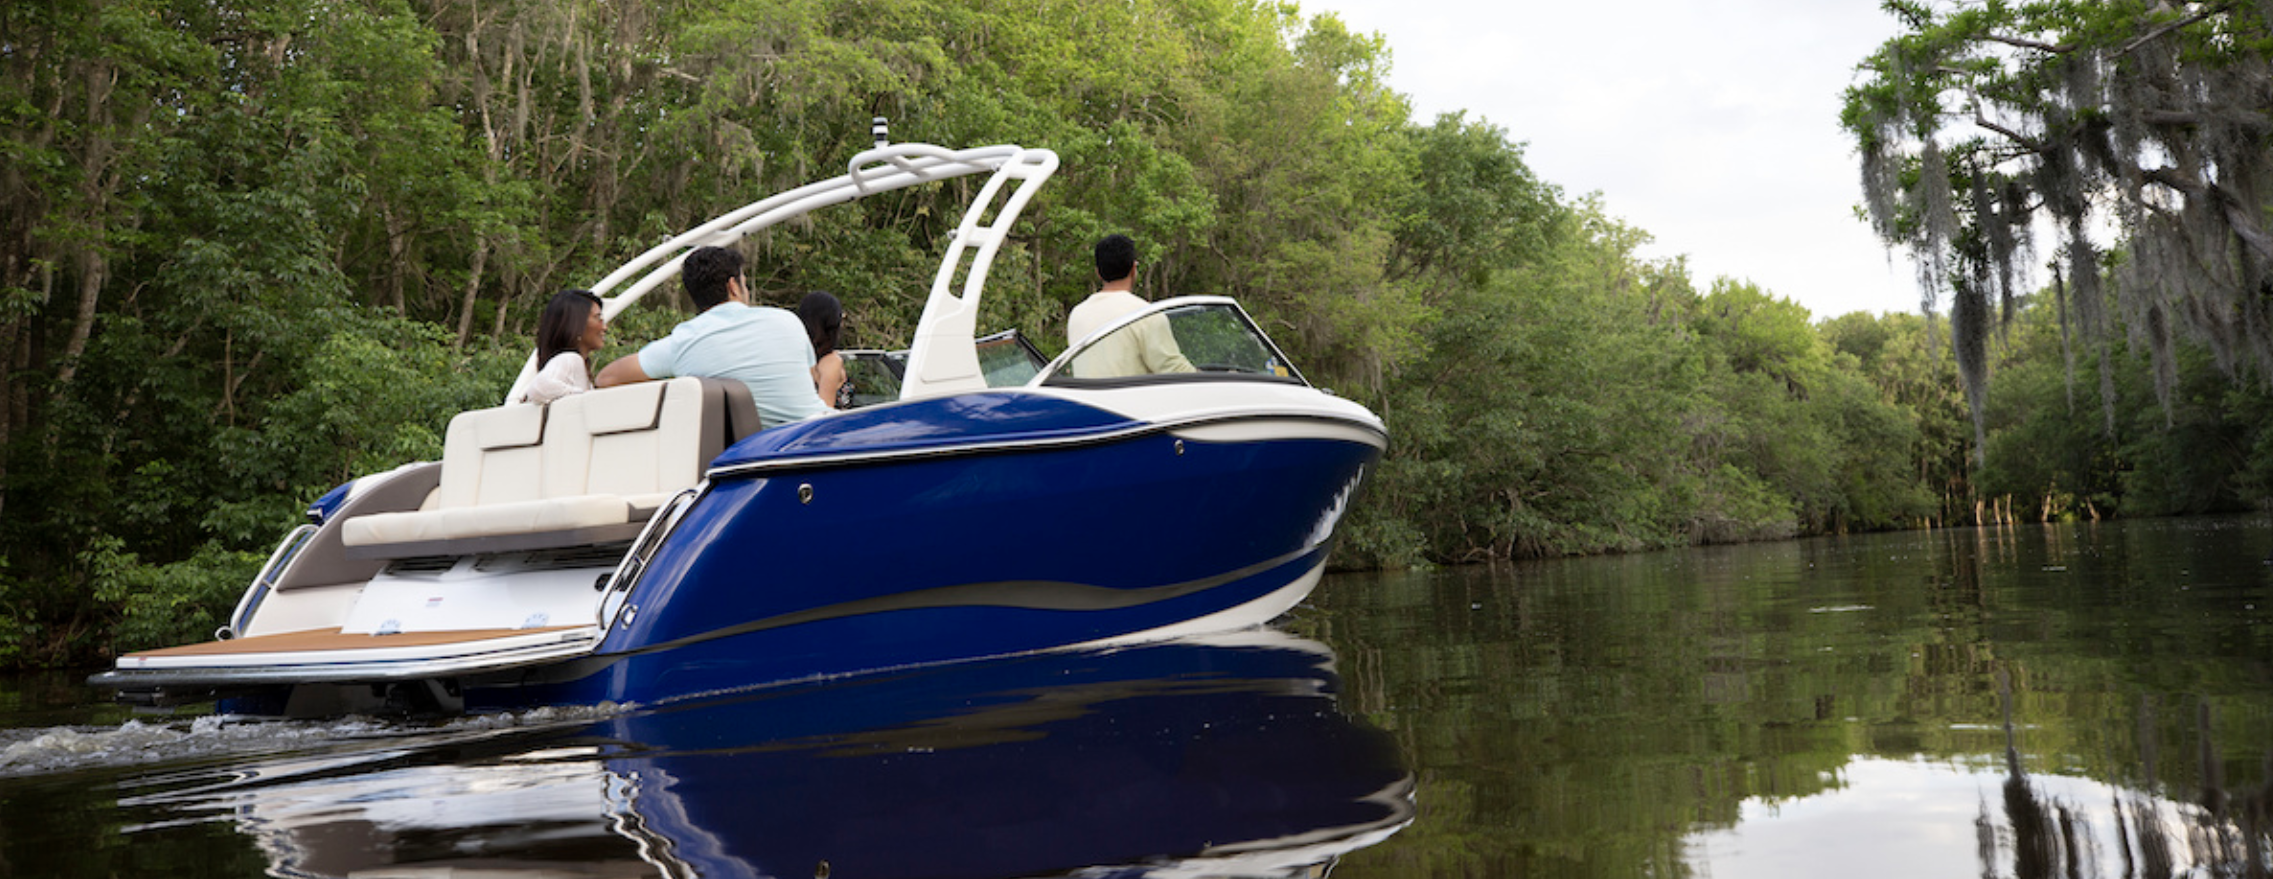 Boat taxes, Boat Financing, Write-Offs, Deductions, Discover Boating